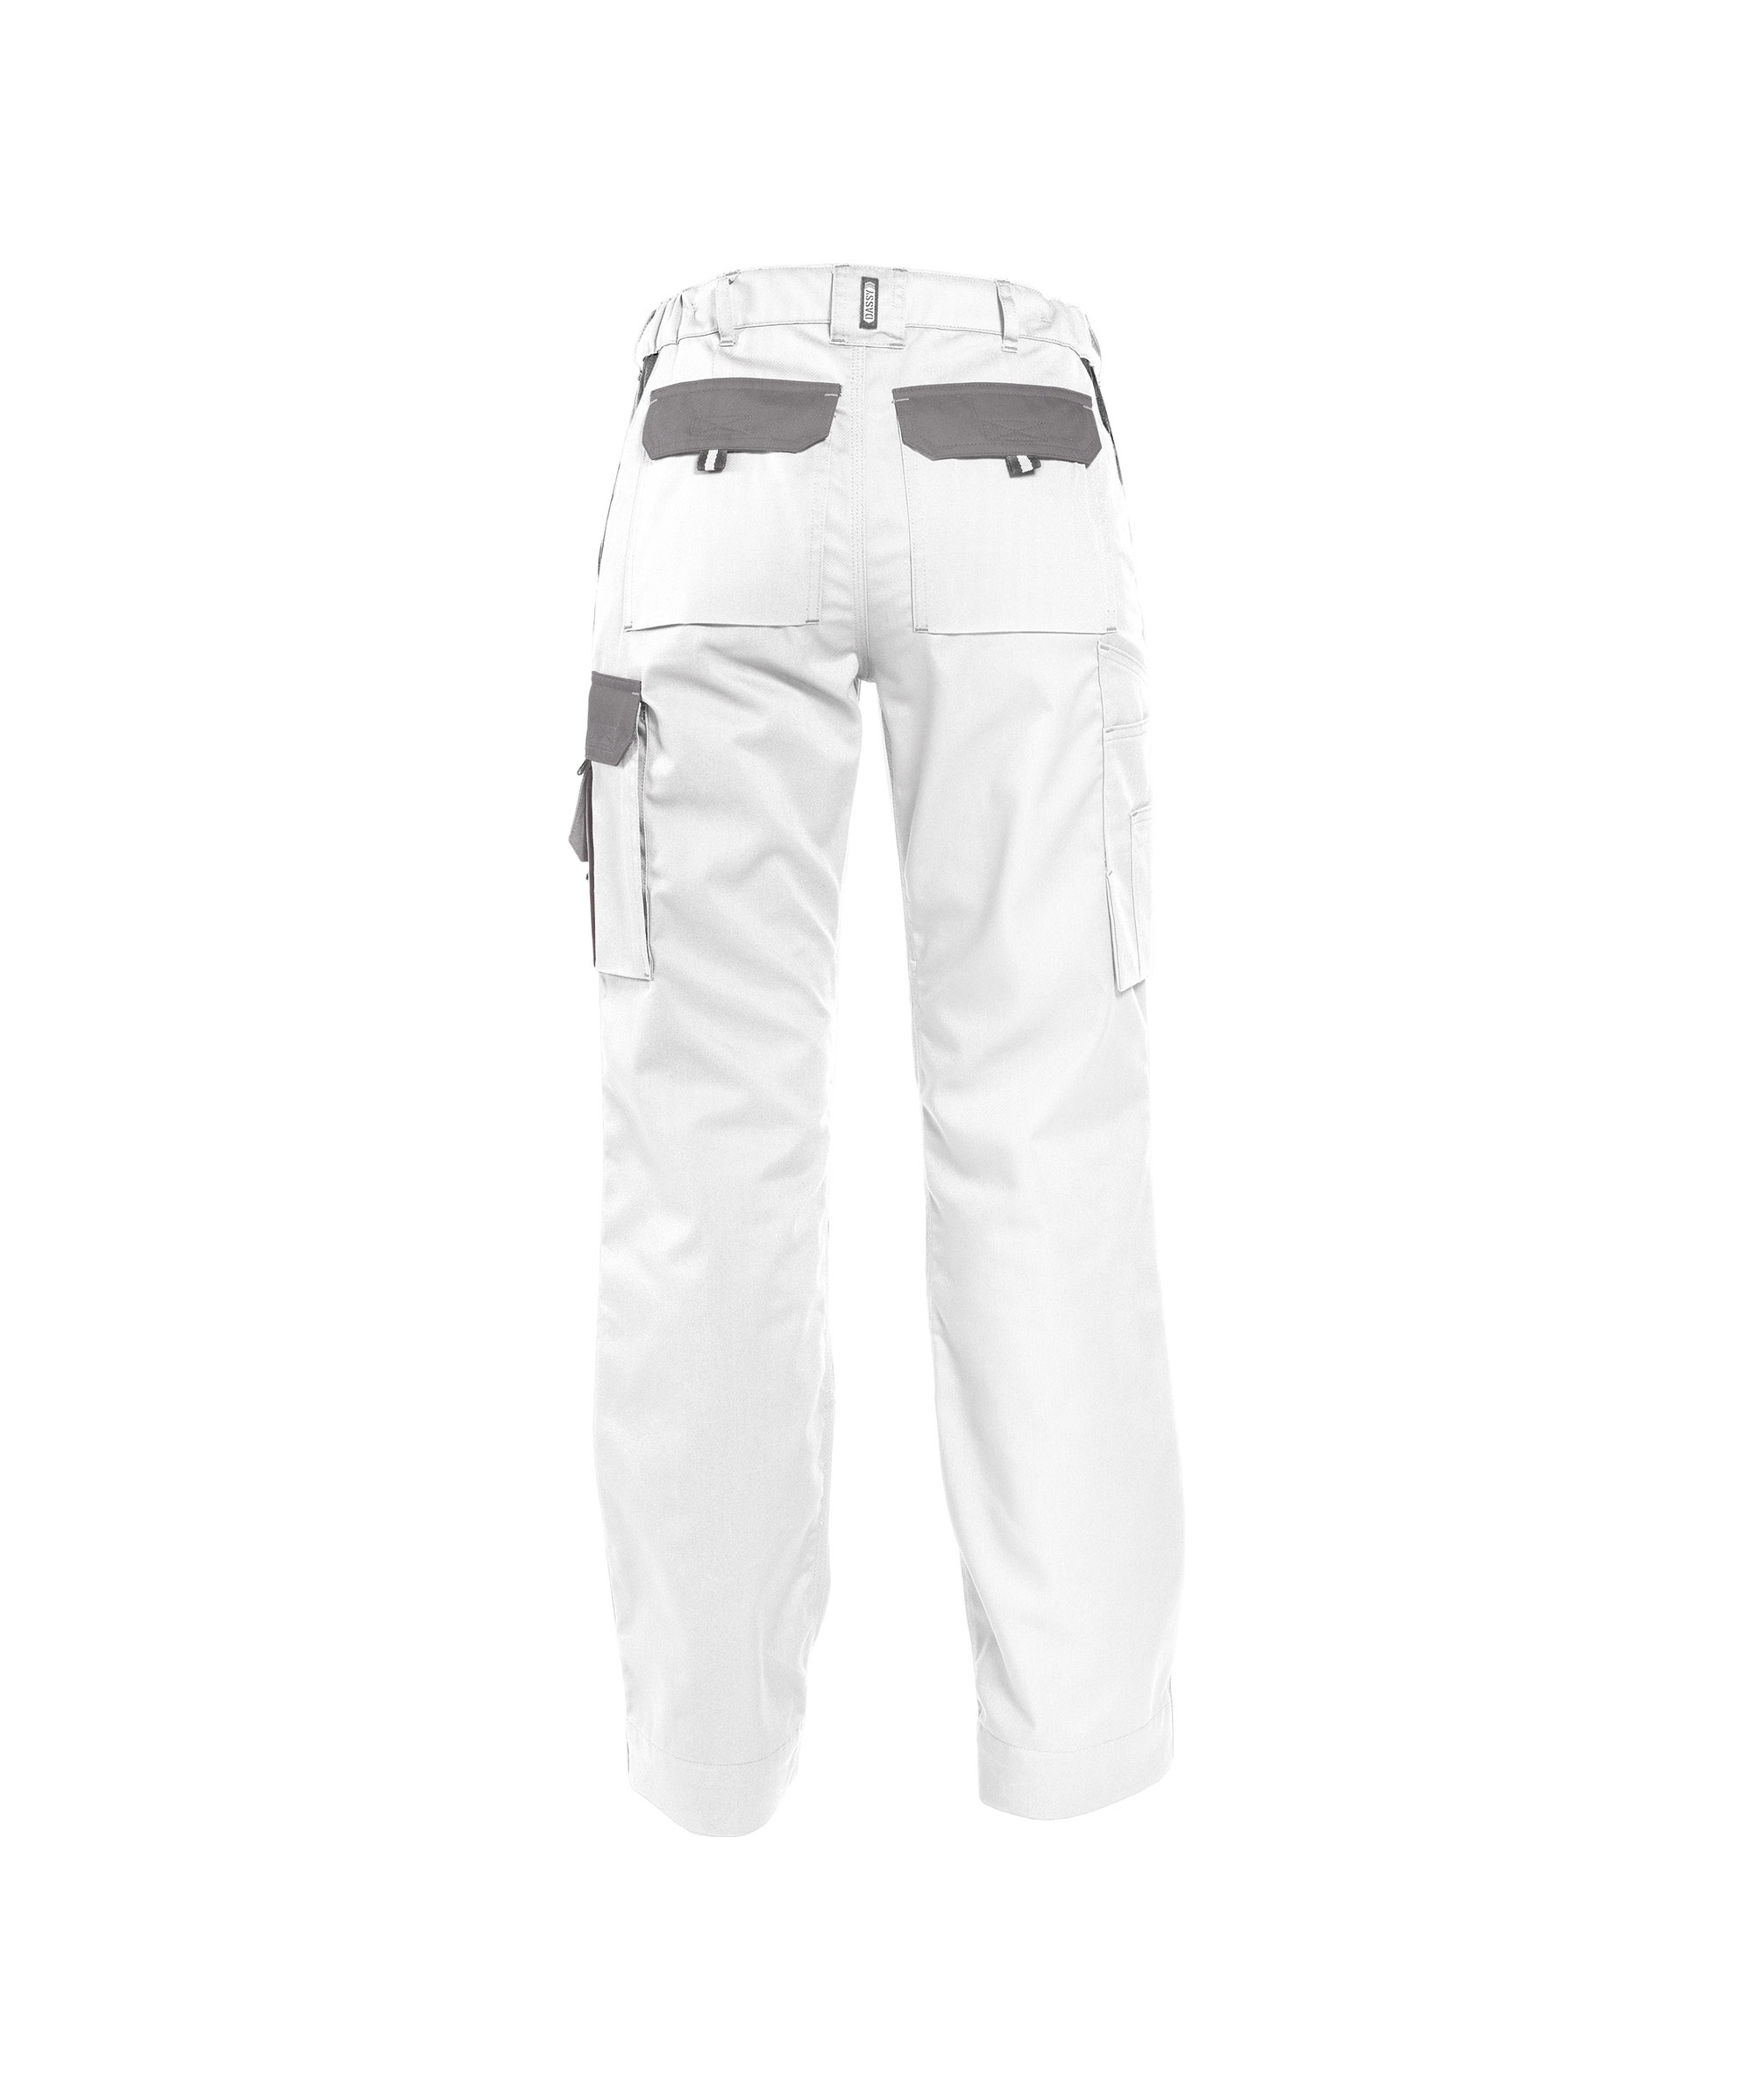 boston-women_two-tone-work-trousers-with-knee-pockets_white-cement-grey_back.jpg